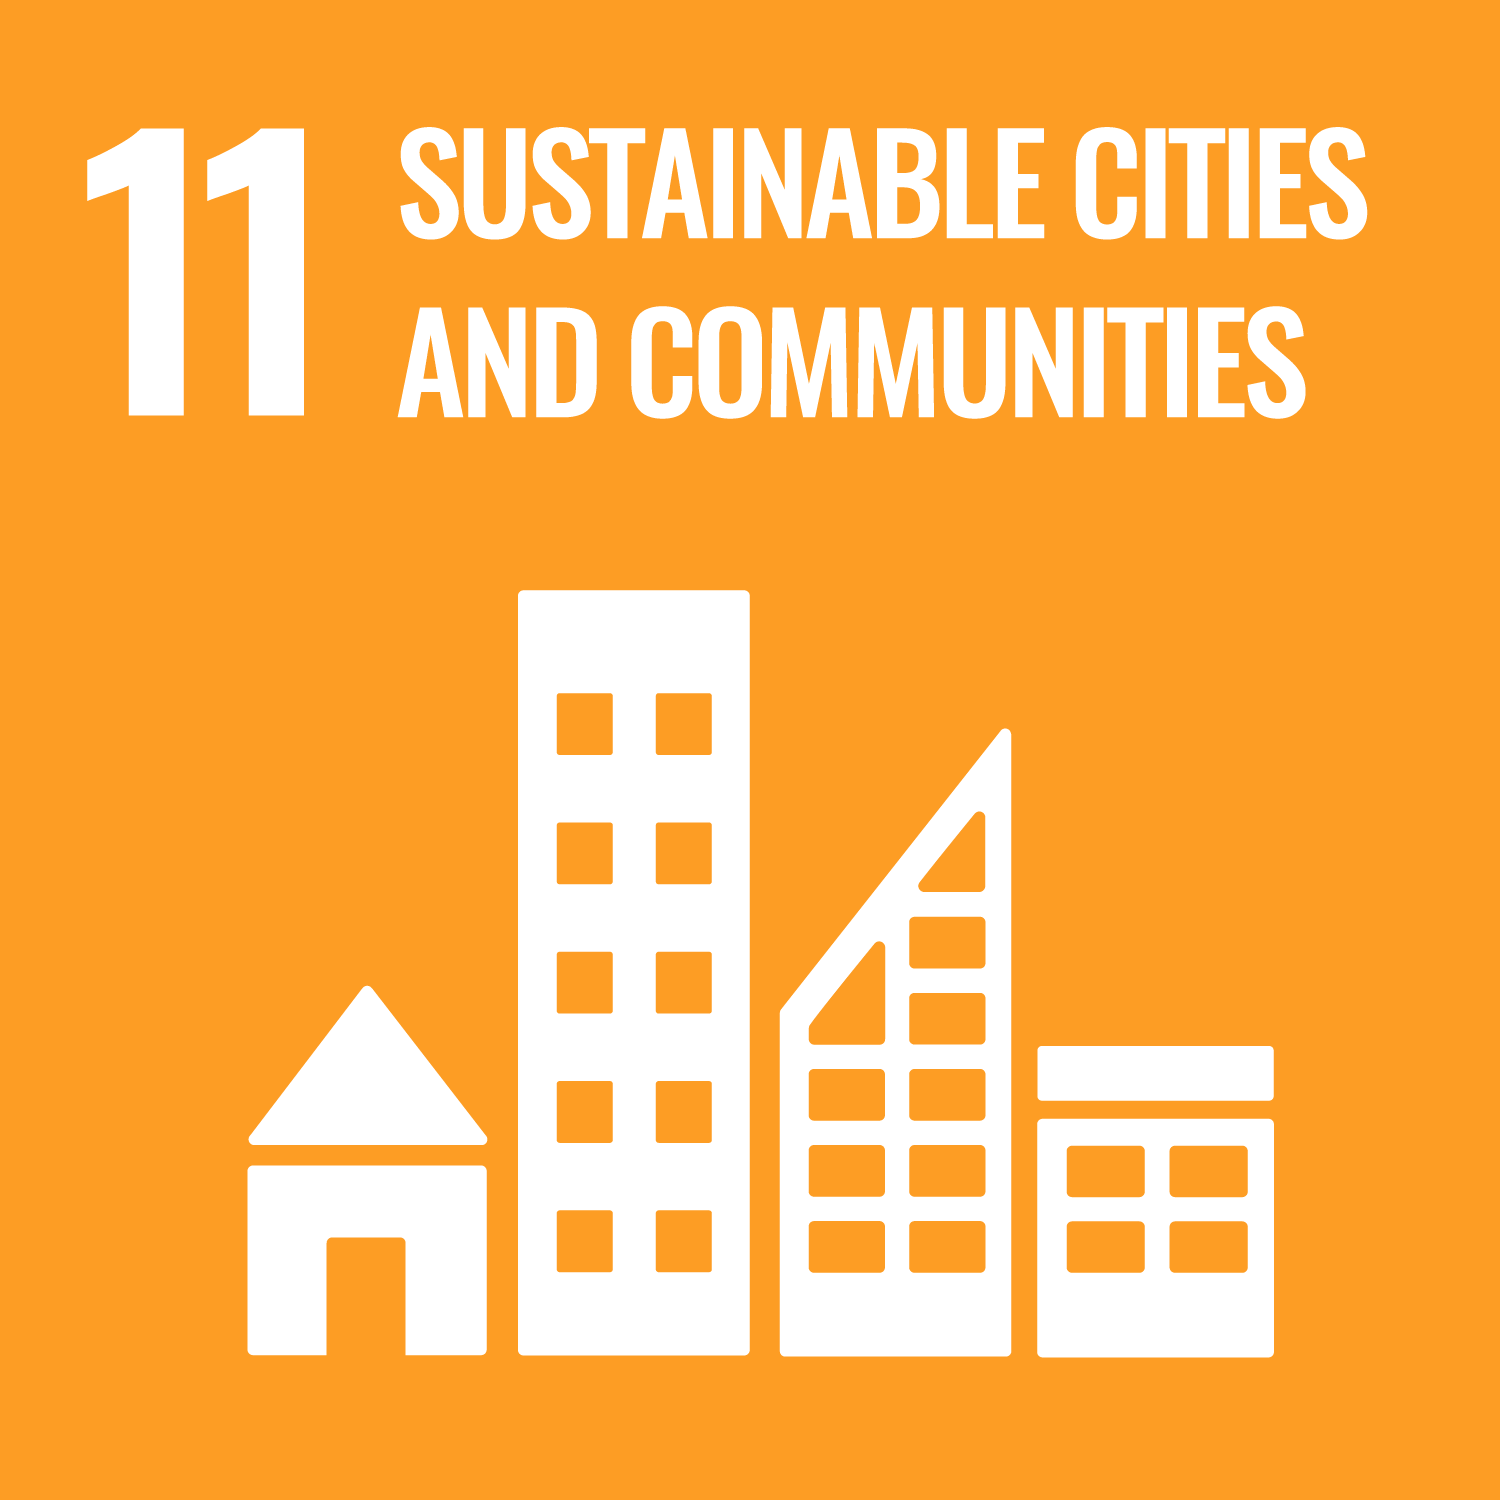 United Nations Sustainable Development Goal Number 11: Sustainable Cities and Communities